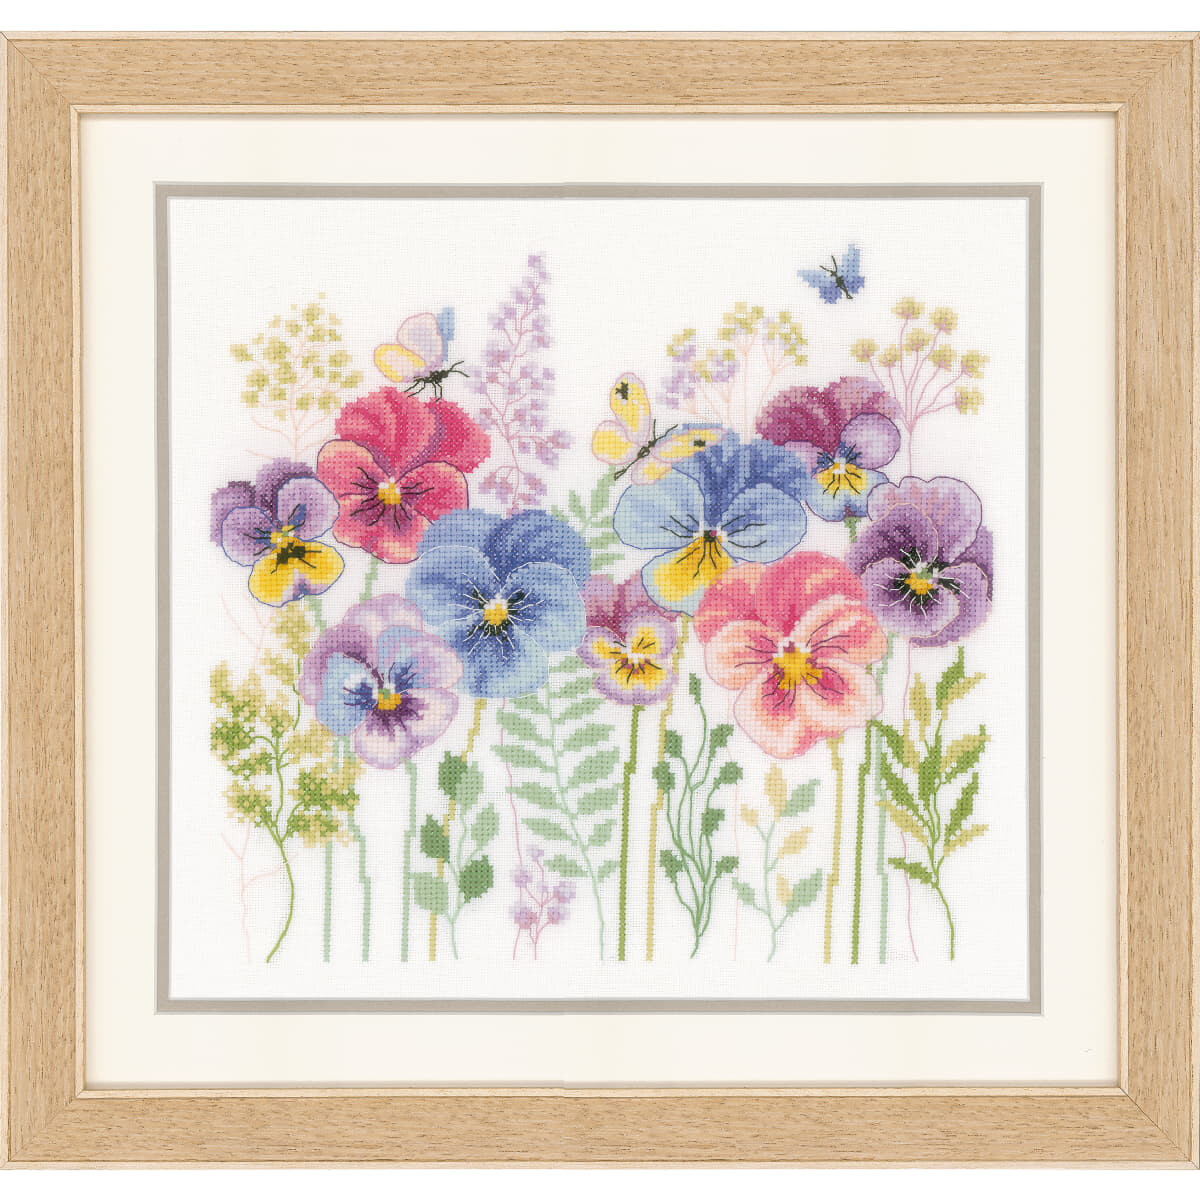 Vervaco counted cross stitch kit "Pansies and...